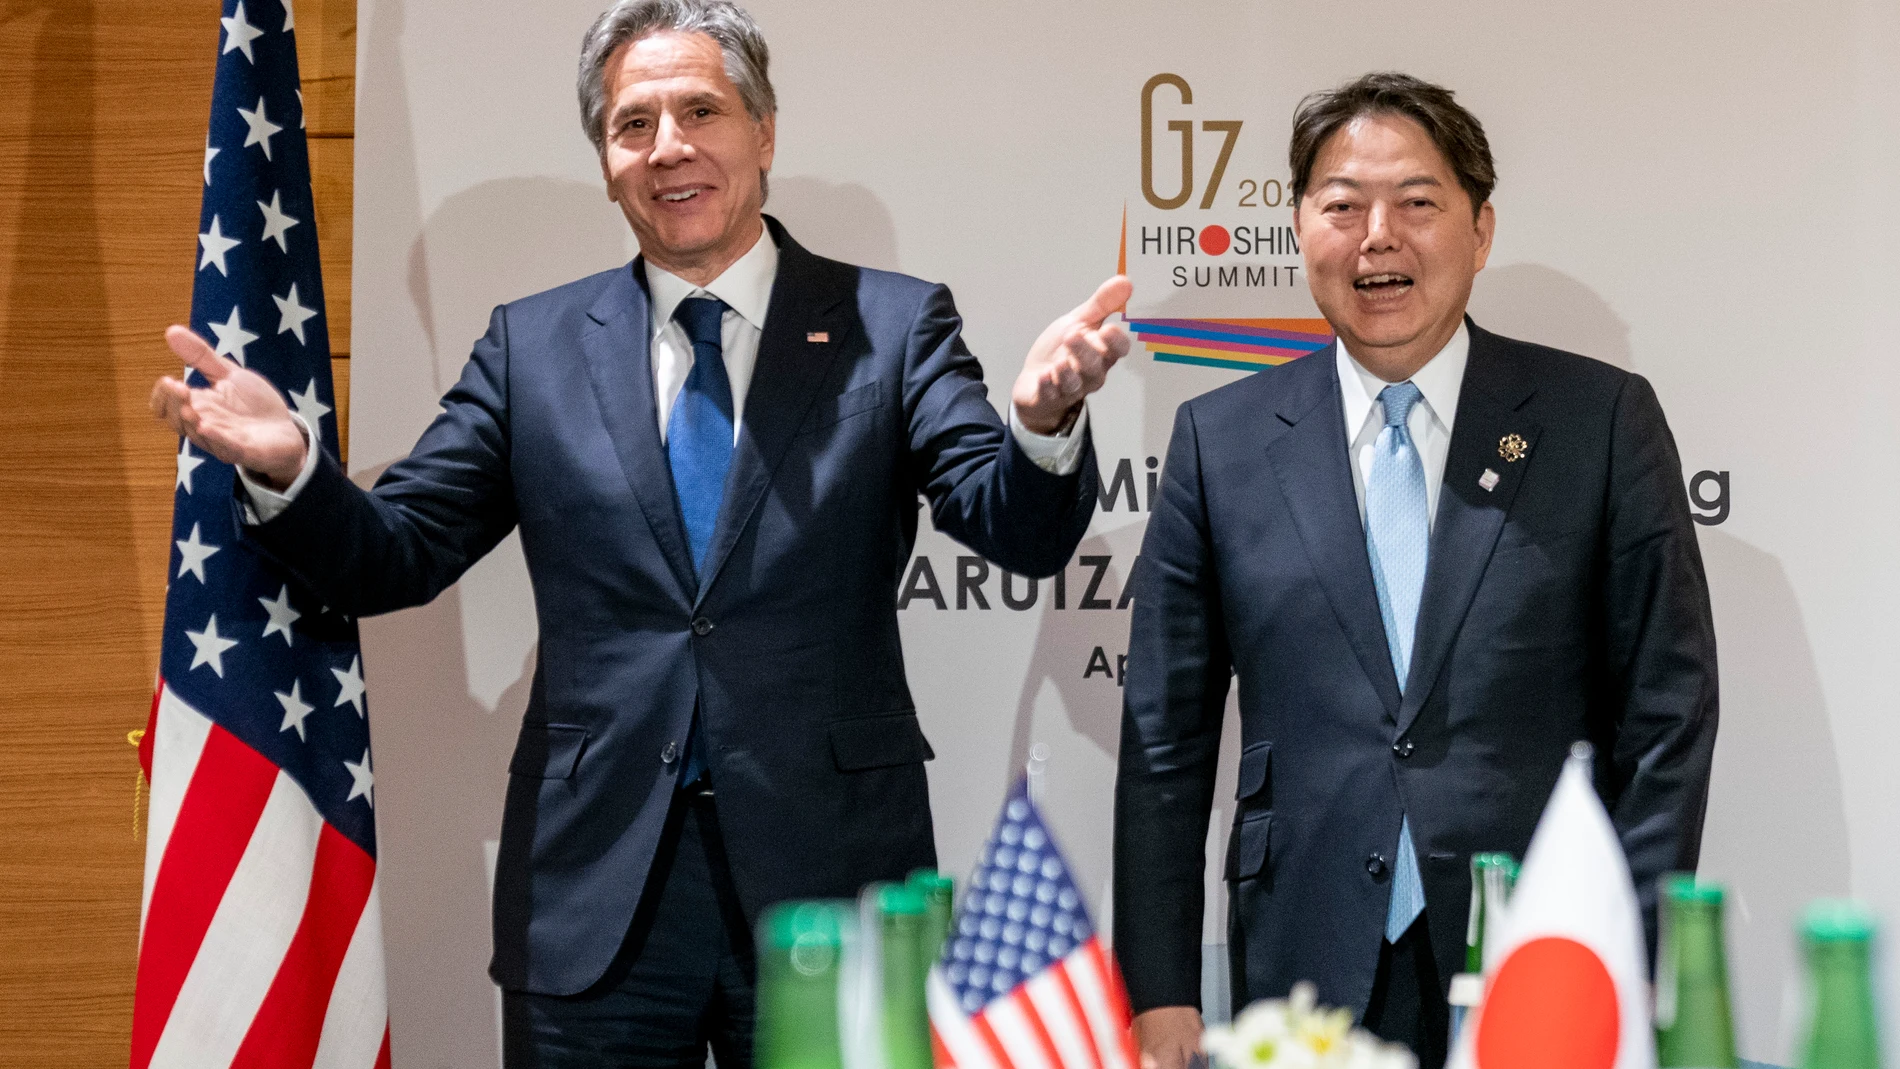 U.S. Secretary of State Antony Blinken, left, and Japan's Foreign Minister Yoshimasa Hayashi arrive for a meeting during a G7 Foreign Ministers' Meeting at The Prince Karuizawa hotel in Karuizawa, Japan, Monday, April 17, 2023. (AP Photo/Andrew Harnik, Pool)